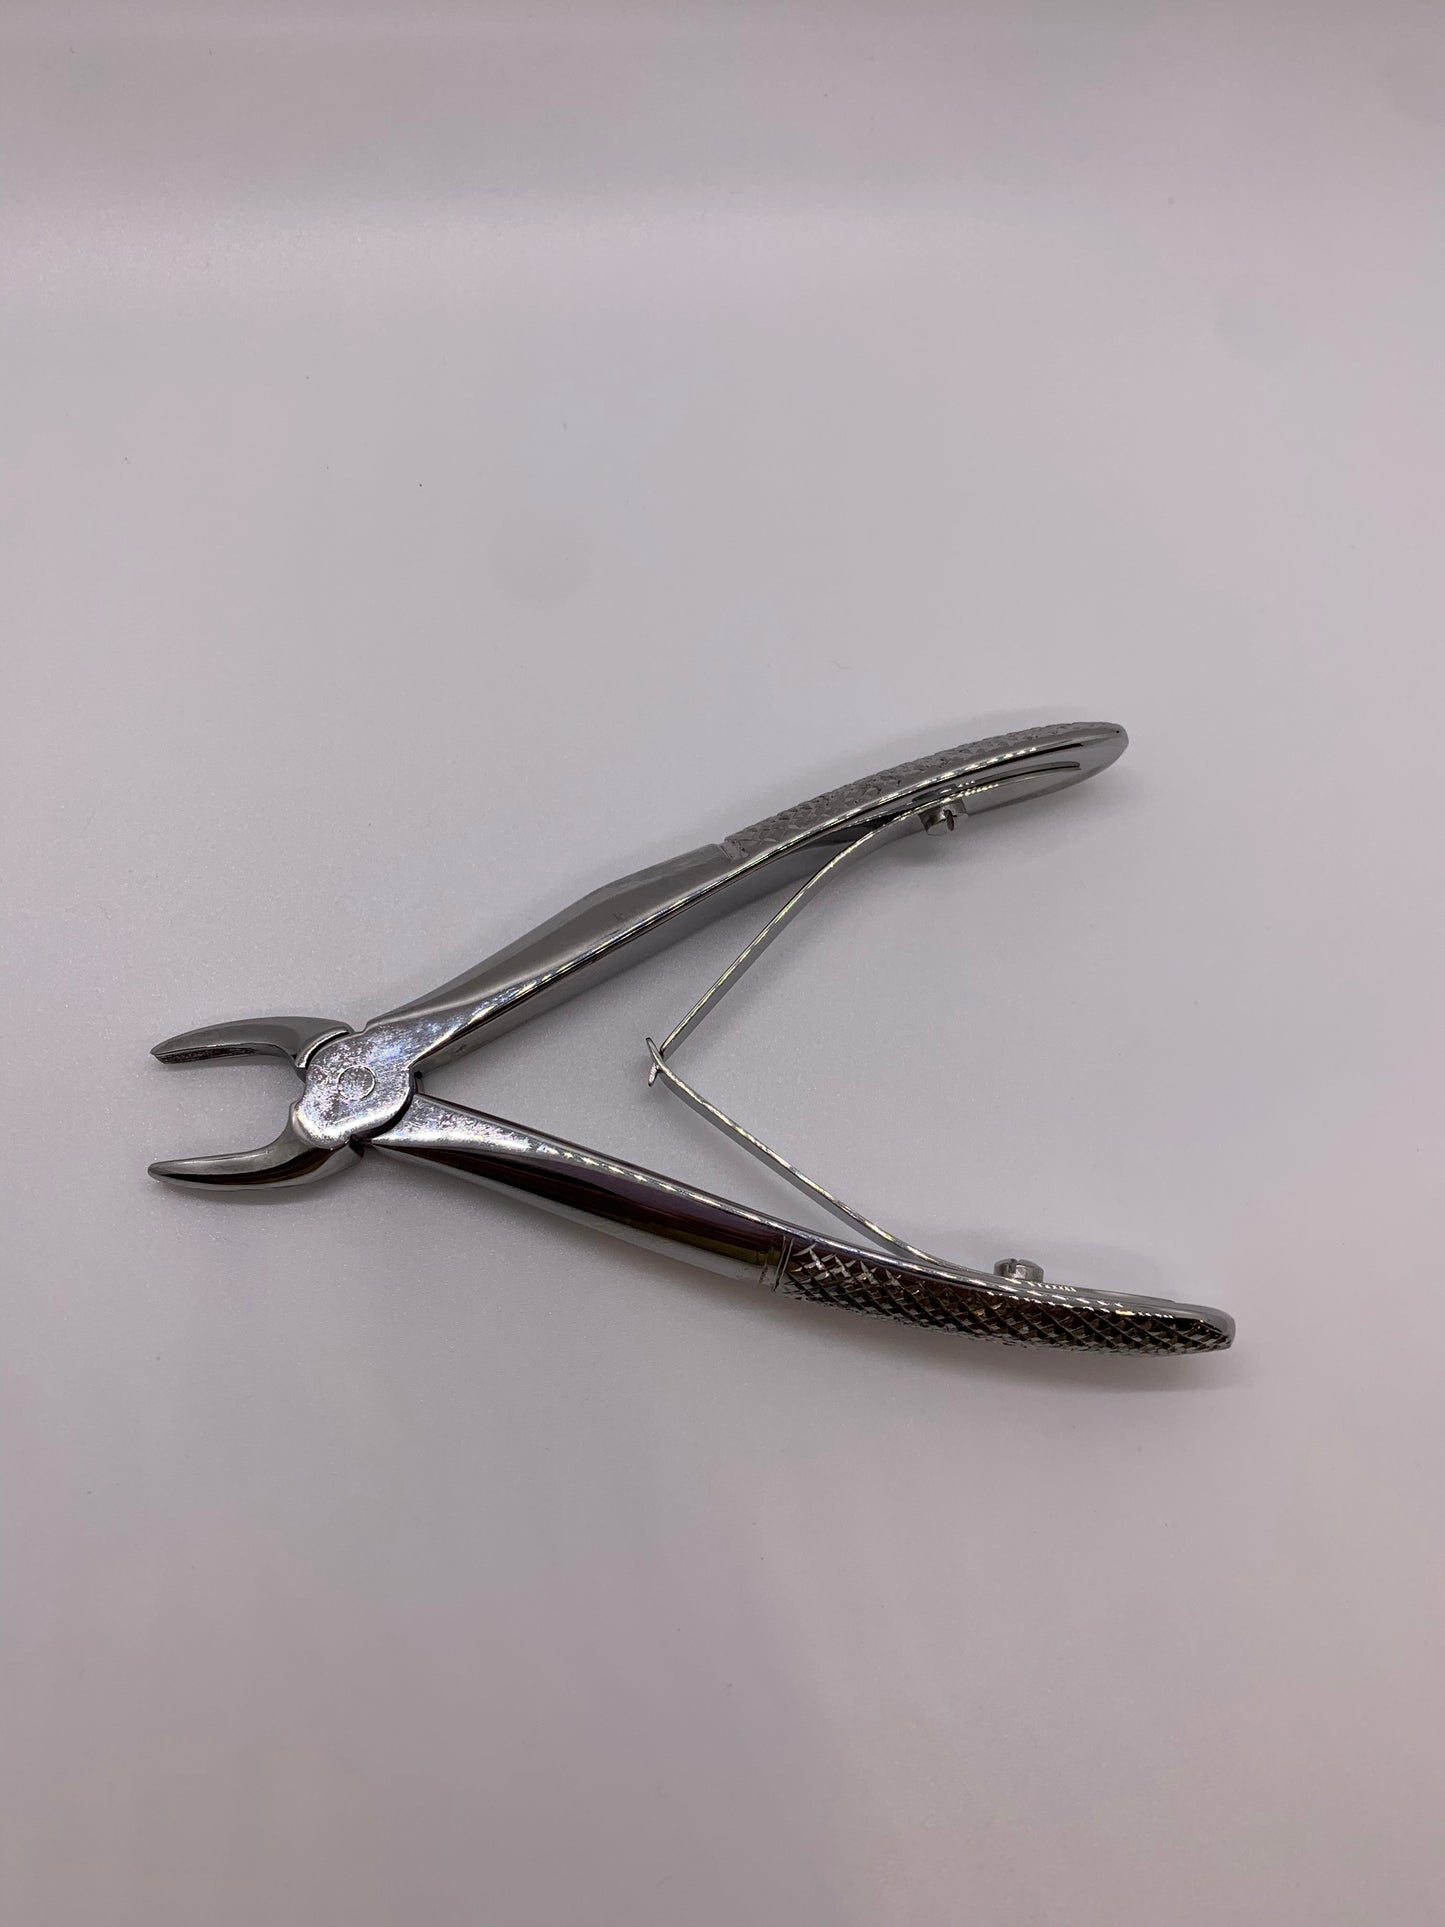 Anatomical Handel Pediatric English Pattren Tooth Extracting Forcep Fig:137B With Serrated Jaws